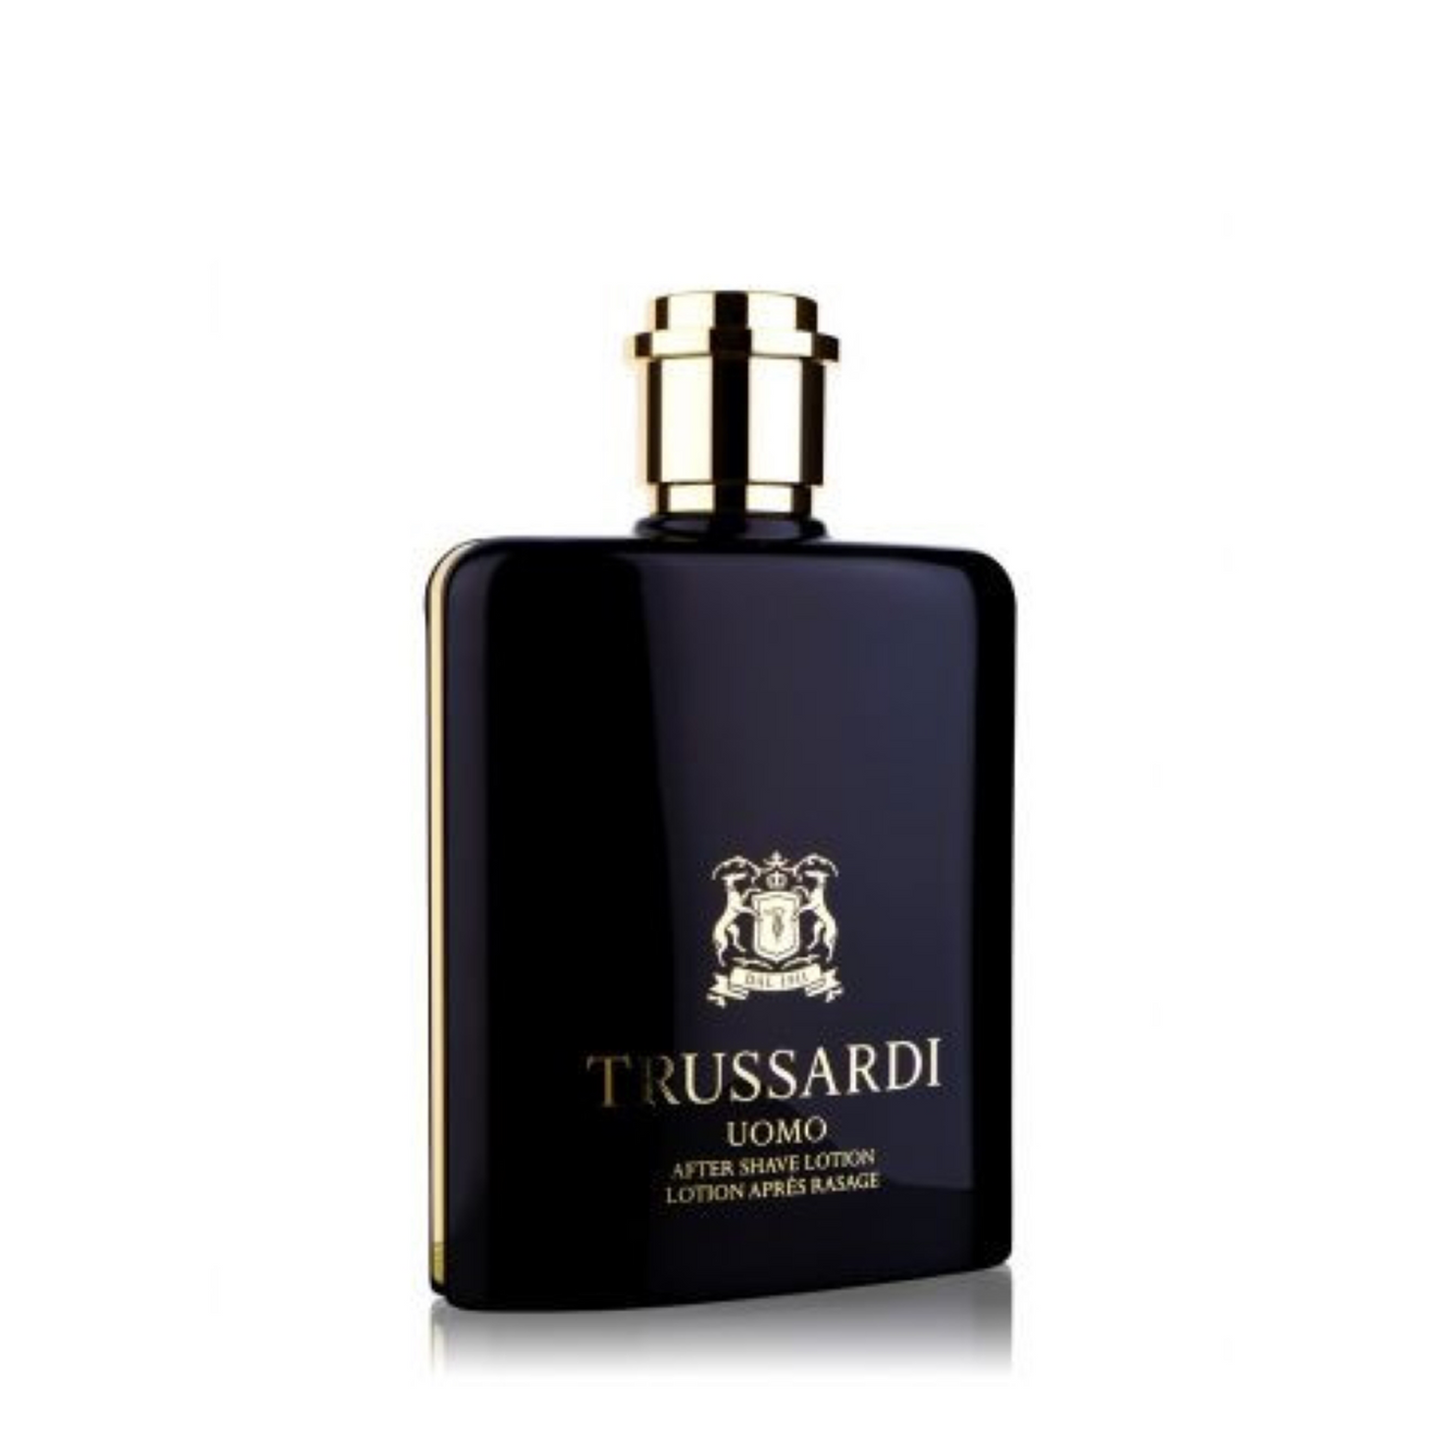 TRUSSARDI 1911 UOMO AFTER SHAVE LOTION SPRAY